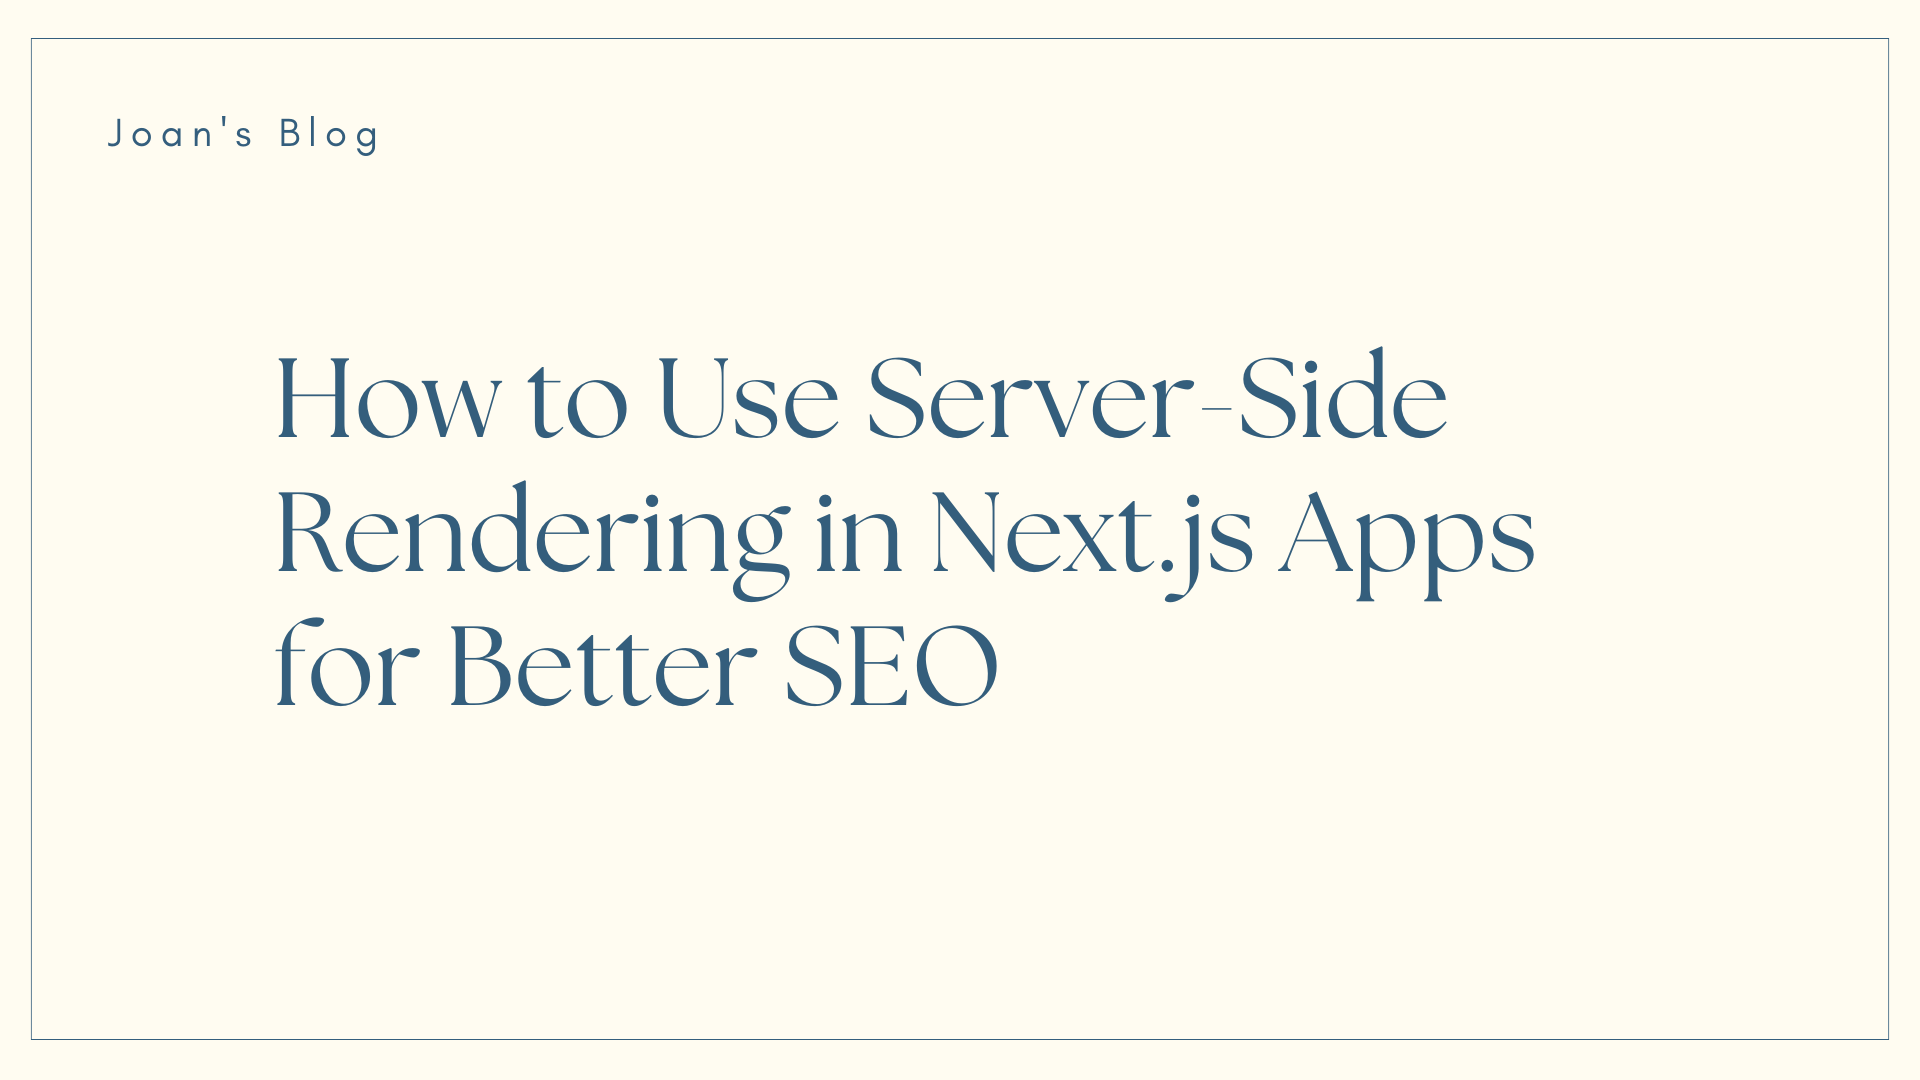 How to Use Server-Side Rendering in Next.js Apps for Better SEO